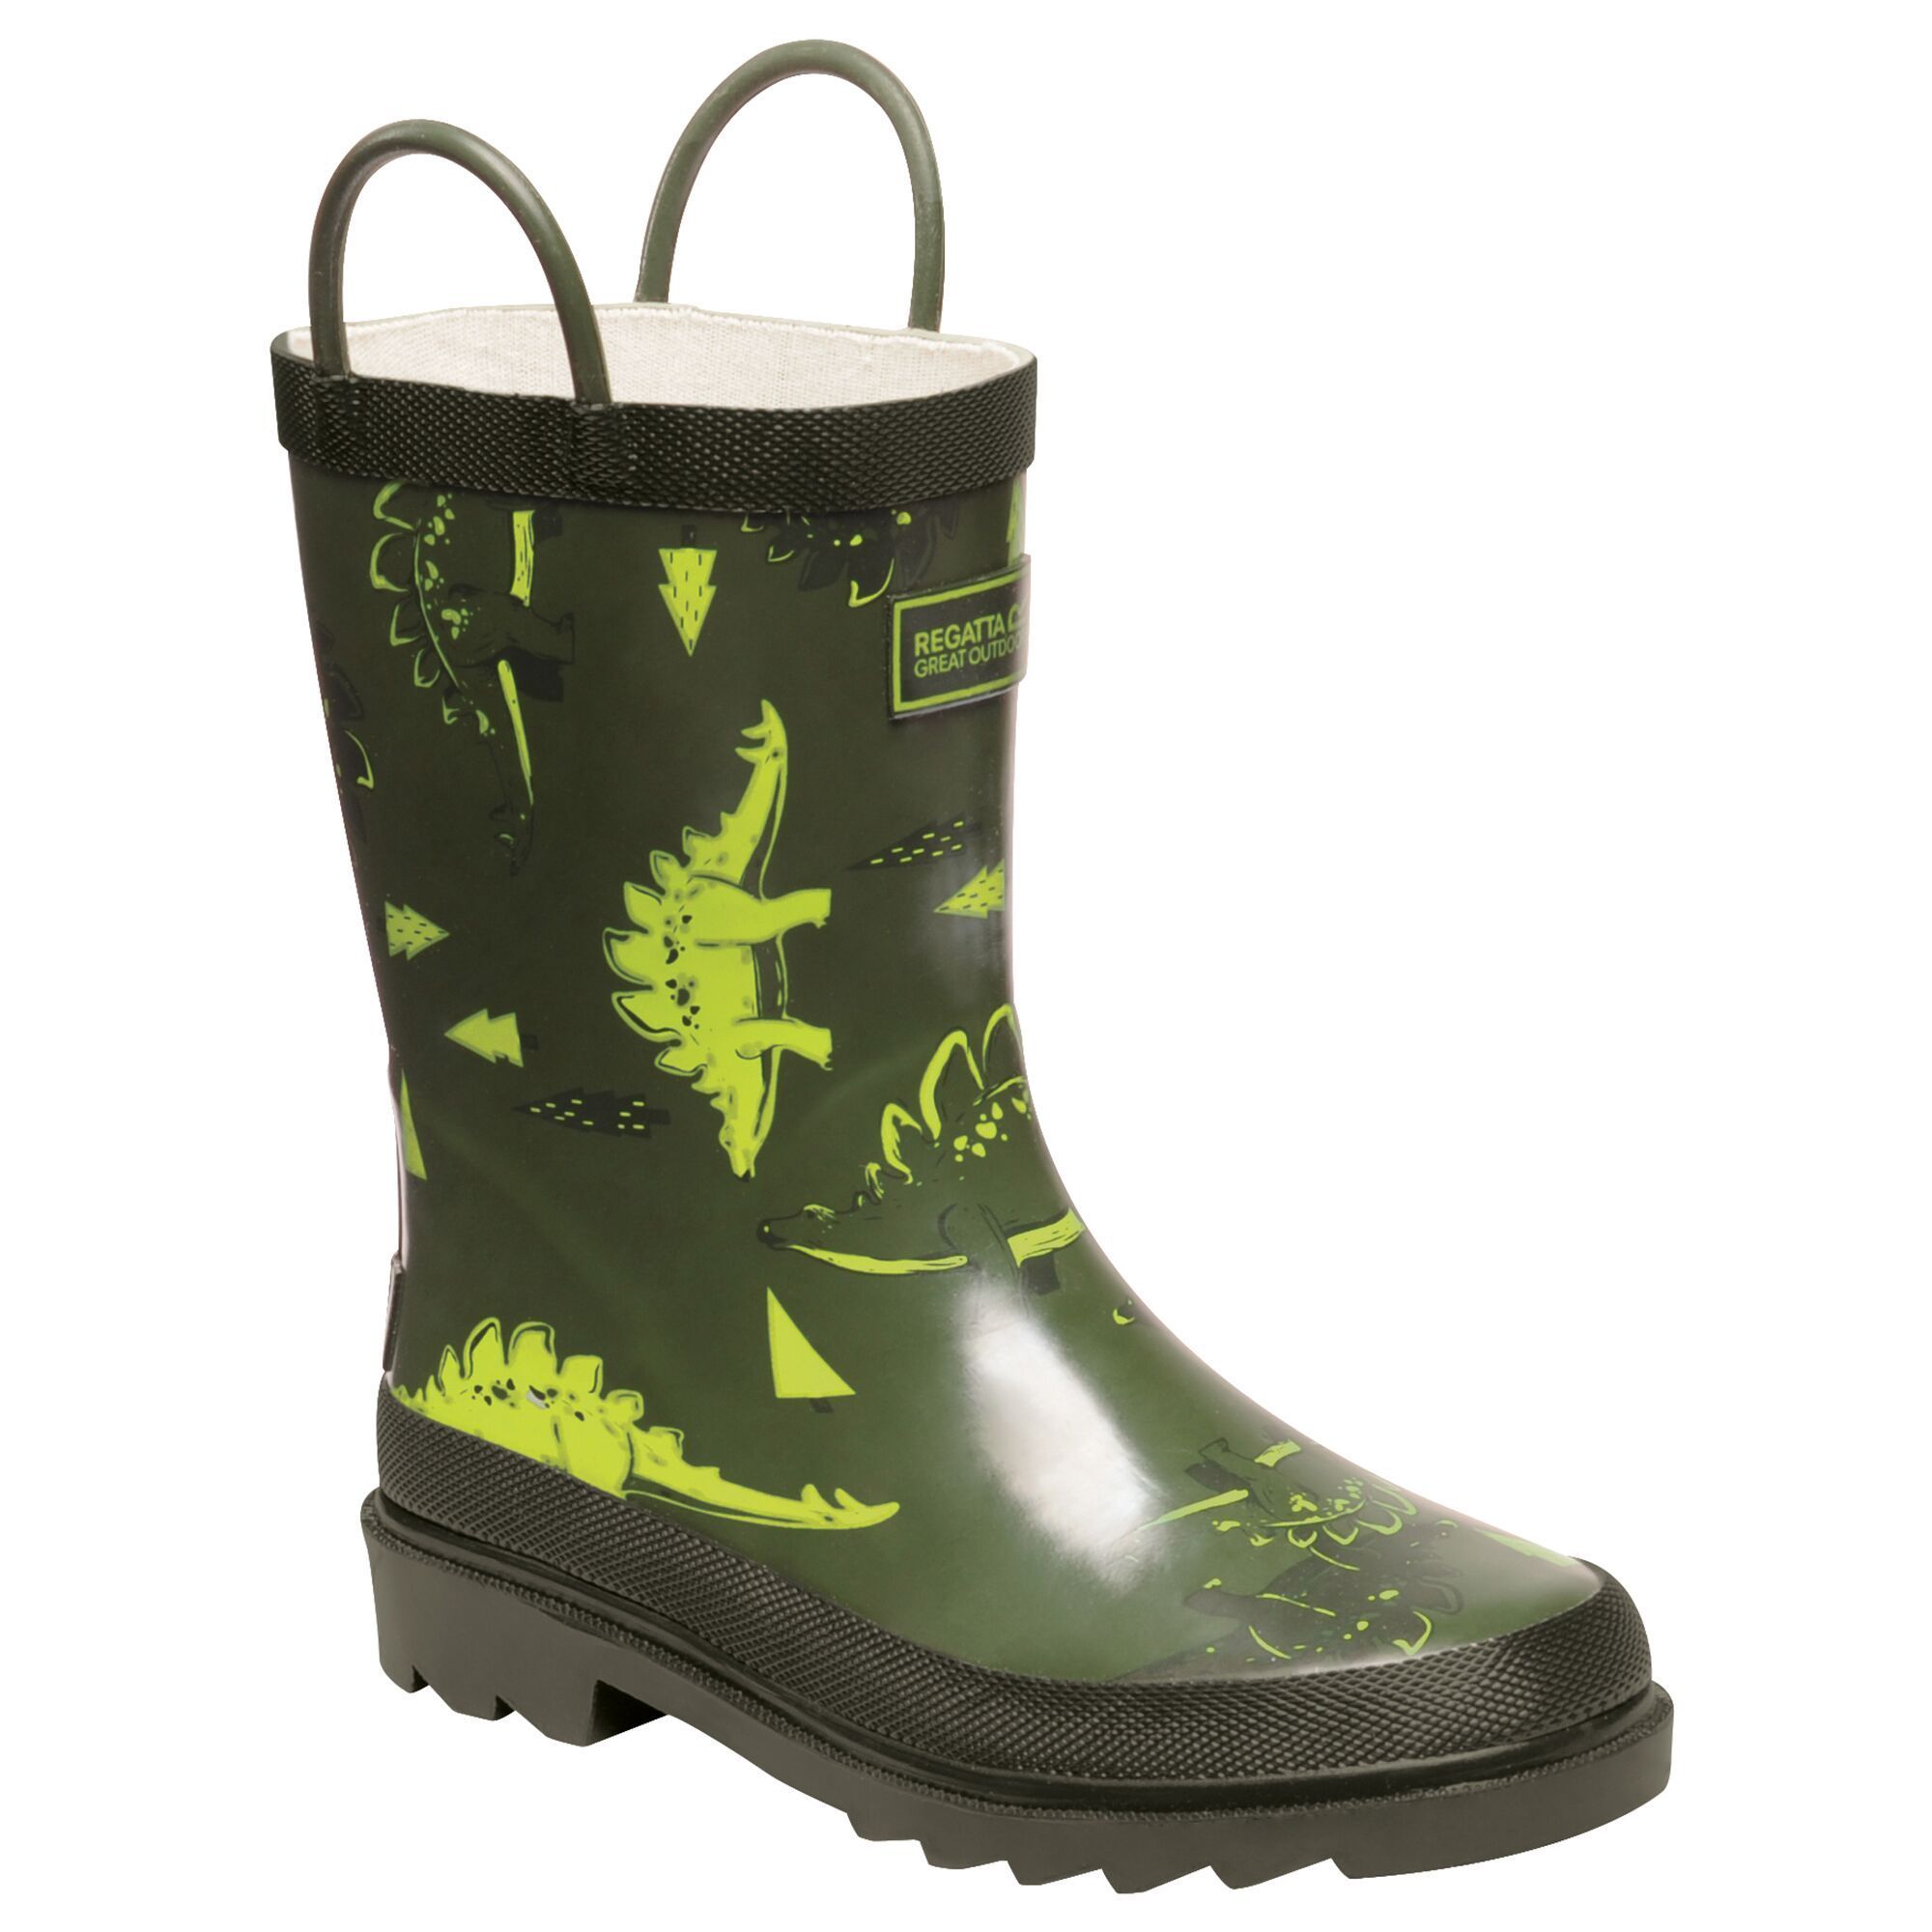 The kids Minnow Wellington Boot with its super cute printed patterns and colours is guaranteed to brighten up the greyest of winter days. Fully lined with natural cotton for added comfort and finished with a super grippy sole, they are adventure ready, whatever the weather. Vulcanised natural rubber construction - durable weather protection. Easy pull handles. Natural cotton lining. EVA comfort footbed. Multi-directional cleated sole design with square heel - reliable underfoot stability. 100% Rubber.